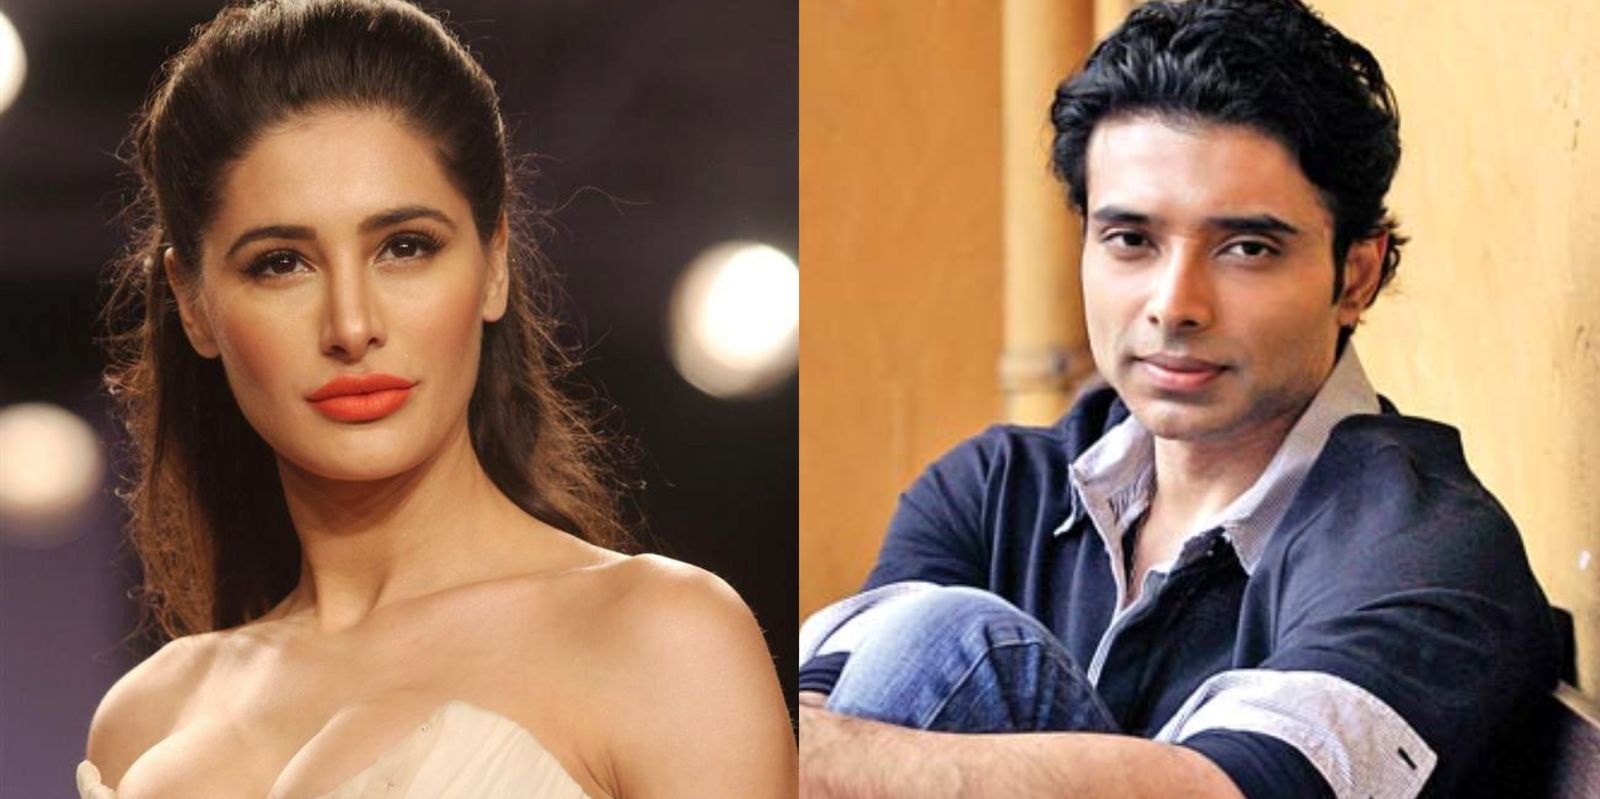 ‘Uday Chopra and I dated for 5 years,’ reveals Nargis Fakhri; regrets keeping her relationship quiet